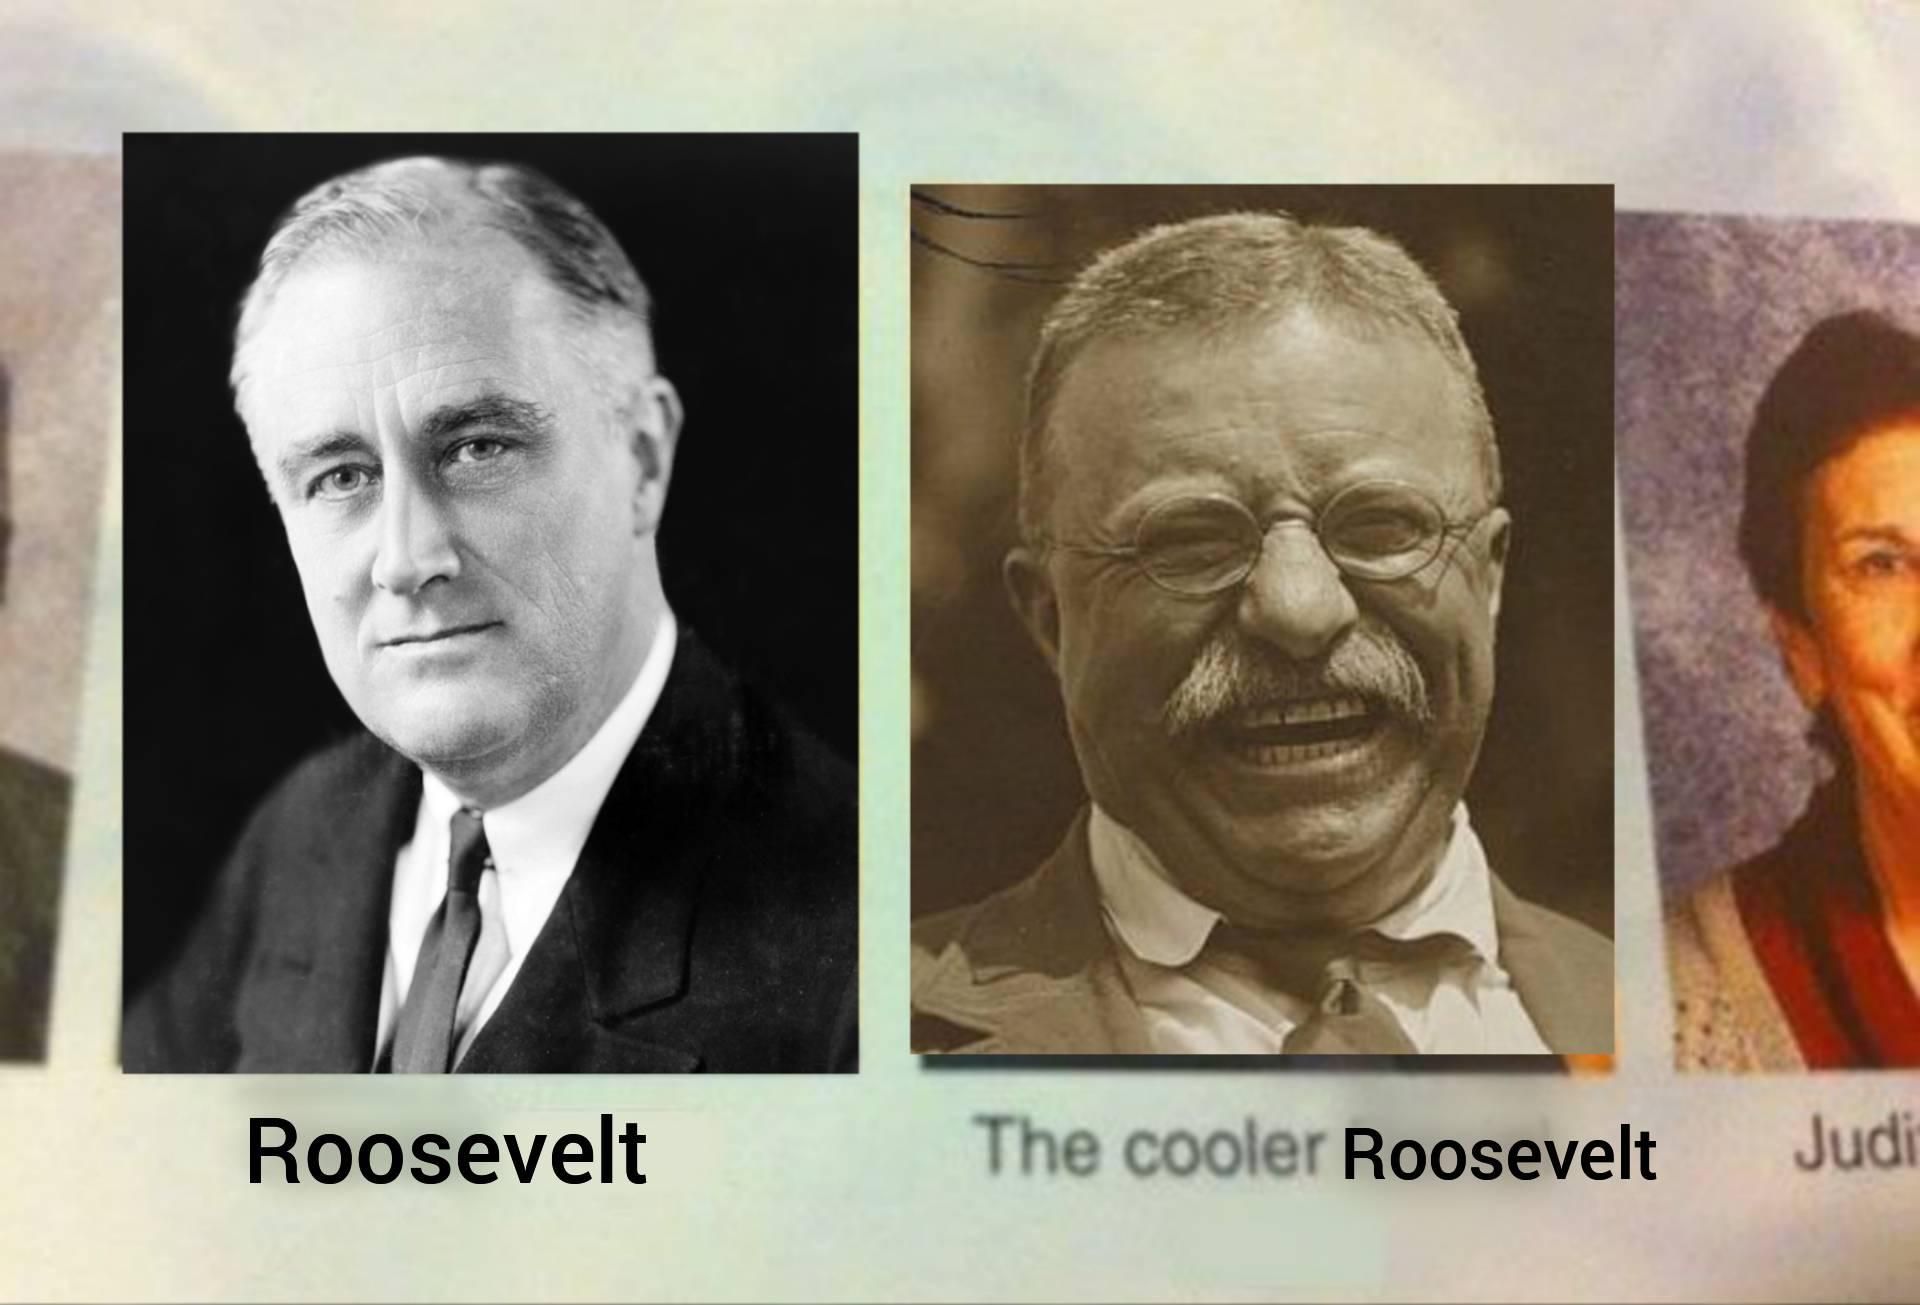 "Death had to take Roosevelt sleeping, for if he had been awake, there would have been a fight."